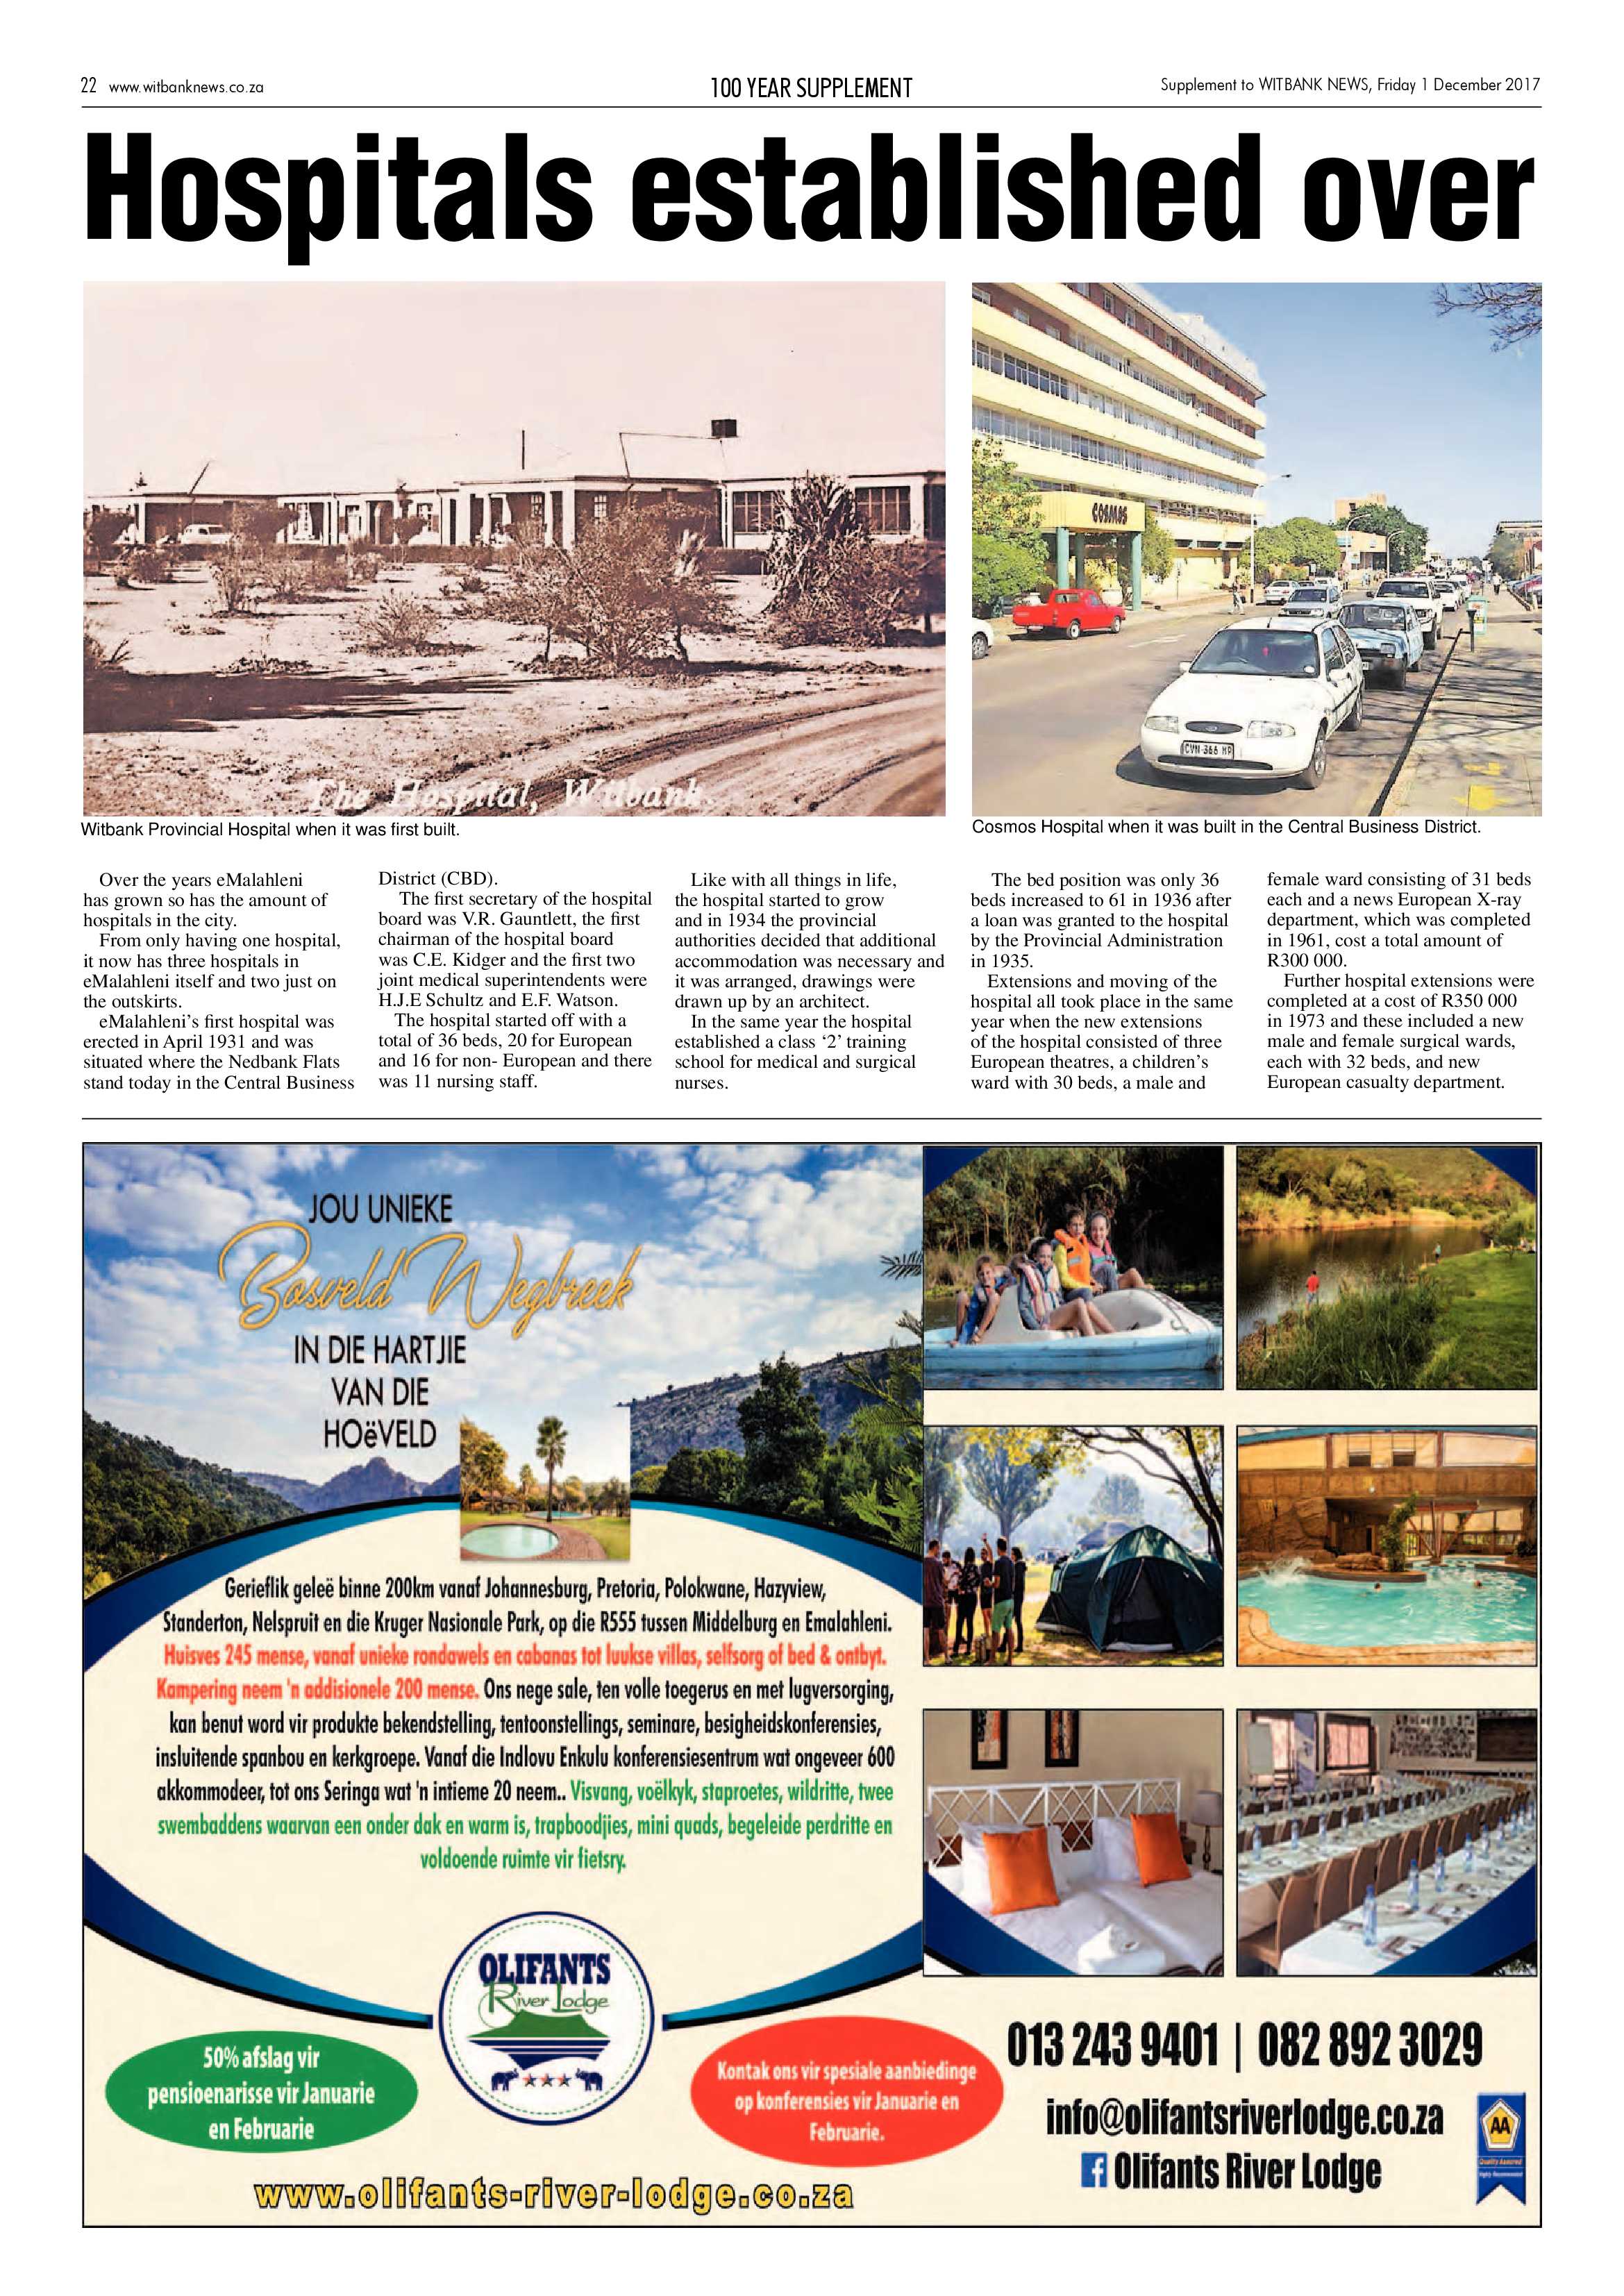 Witbank News 100 Year Supplement page 22